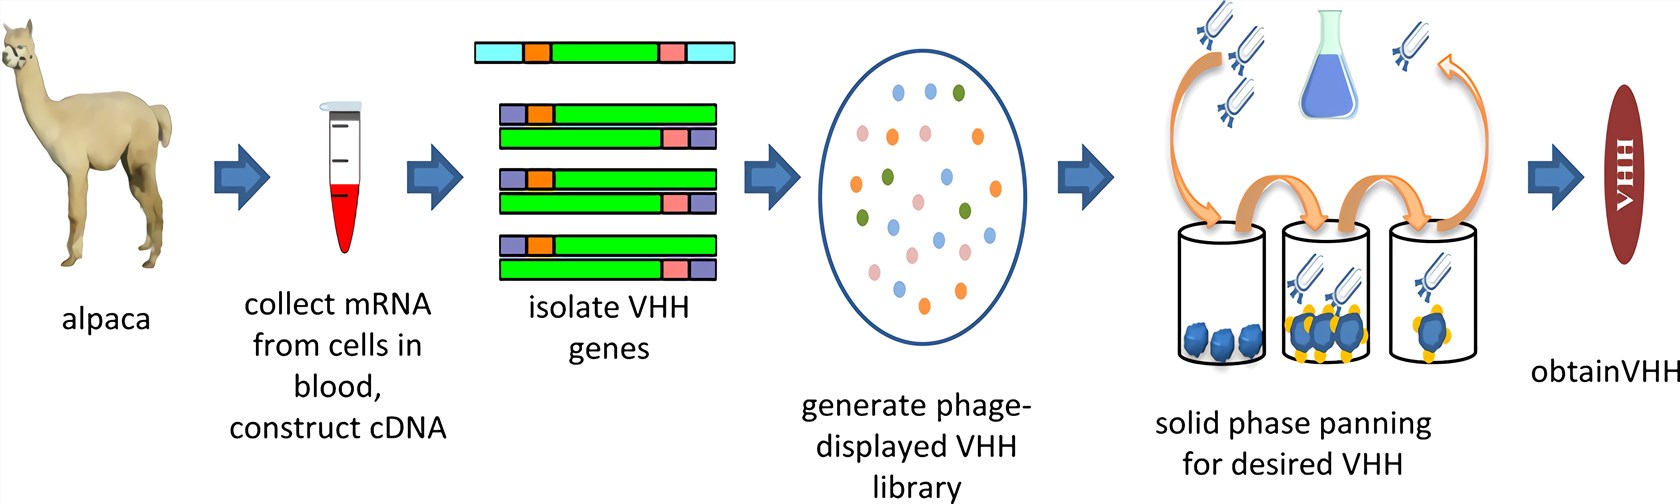 Overview of the process to isolate VHH from camelids.